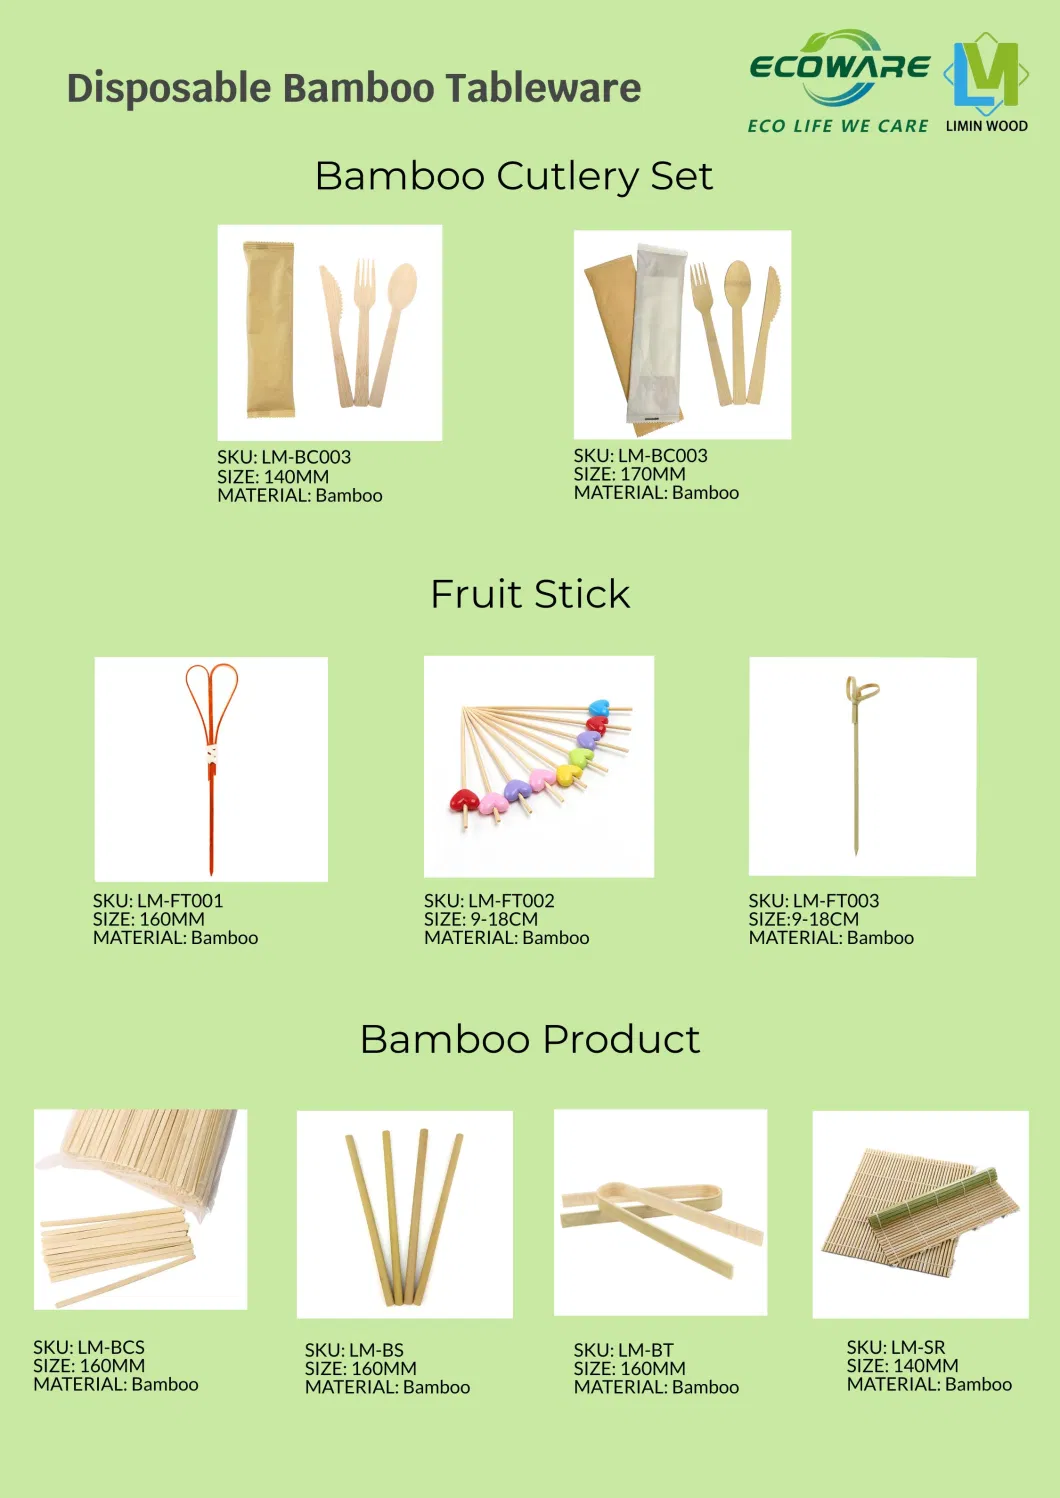 Factory Directly Kid Adult Disposable Charcoal Bristles Bamboo Handle Toothbrush for Sales